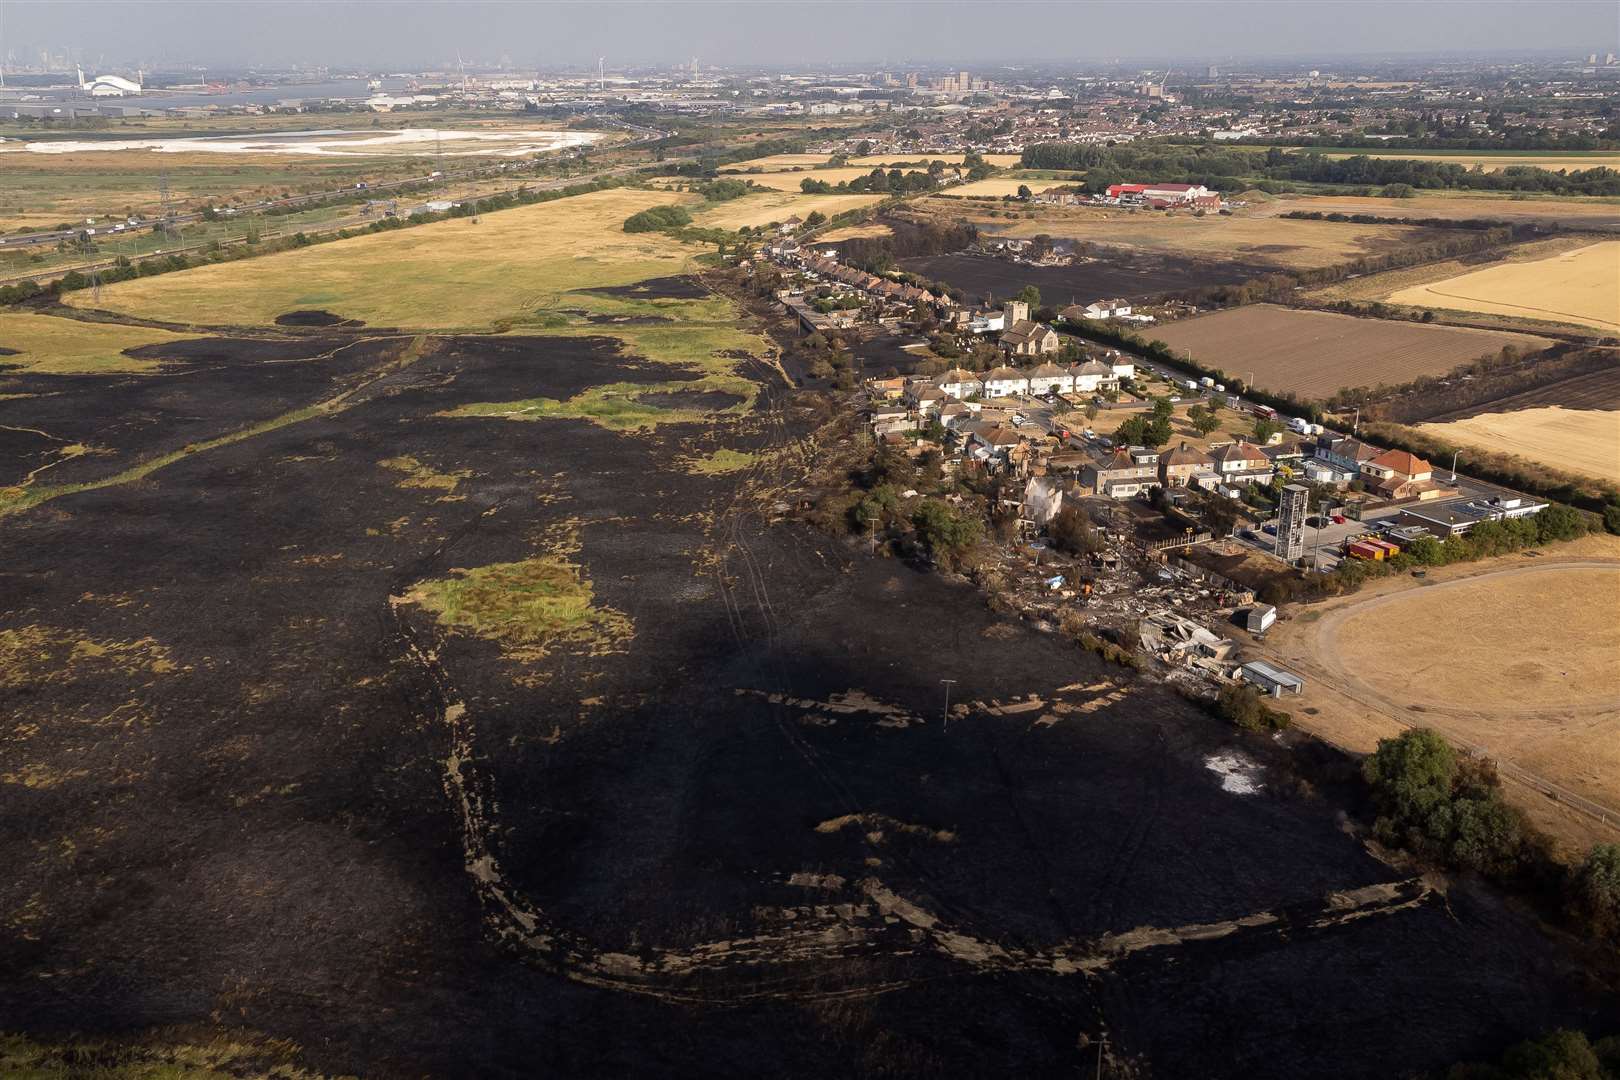 The scene after a blaze in the village of Wennington, east London (Aaron Chown/PA)